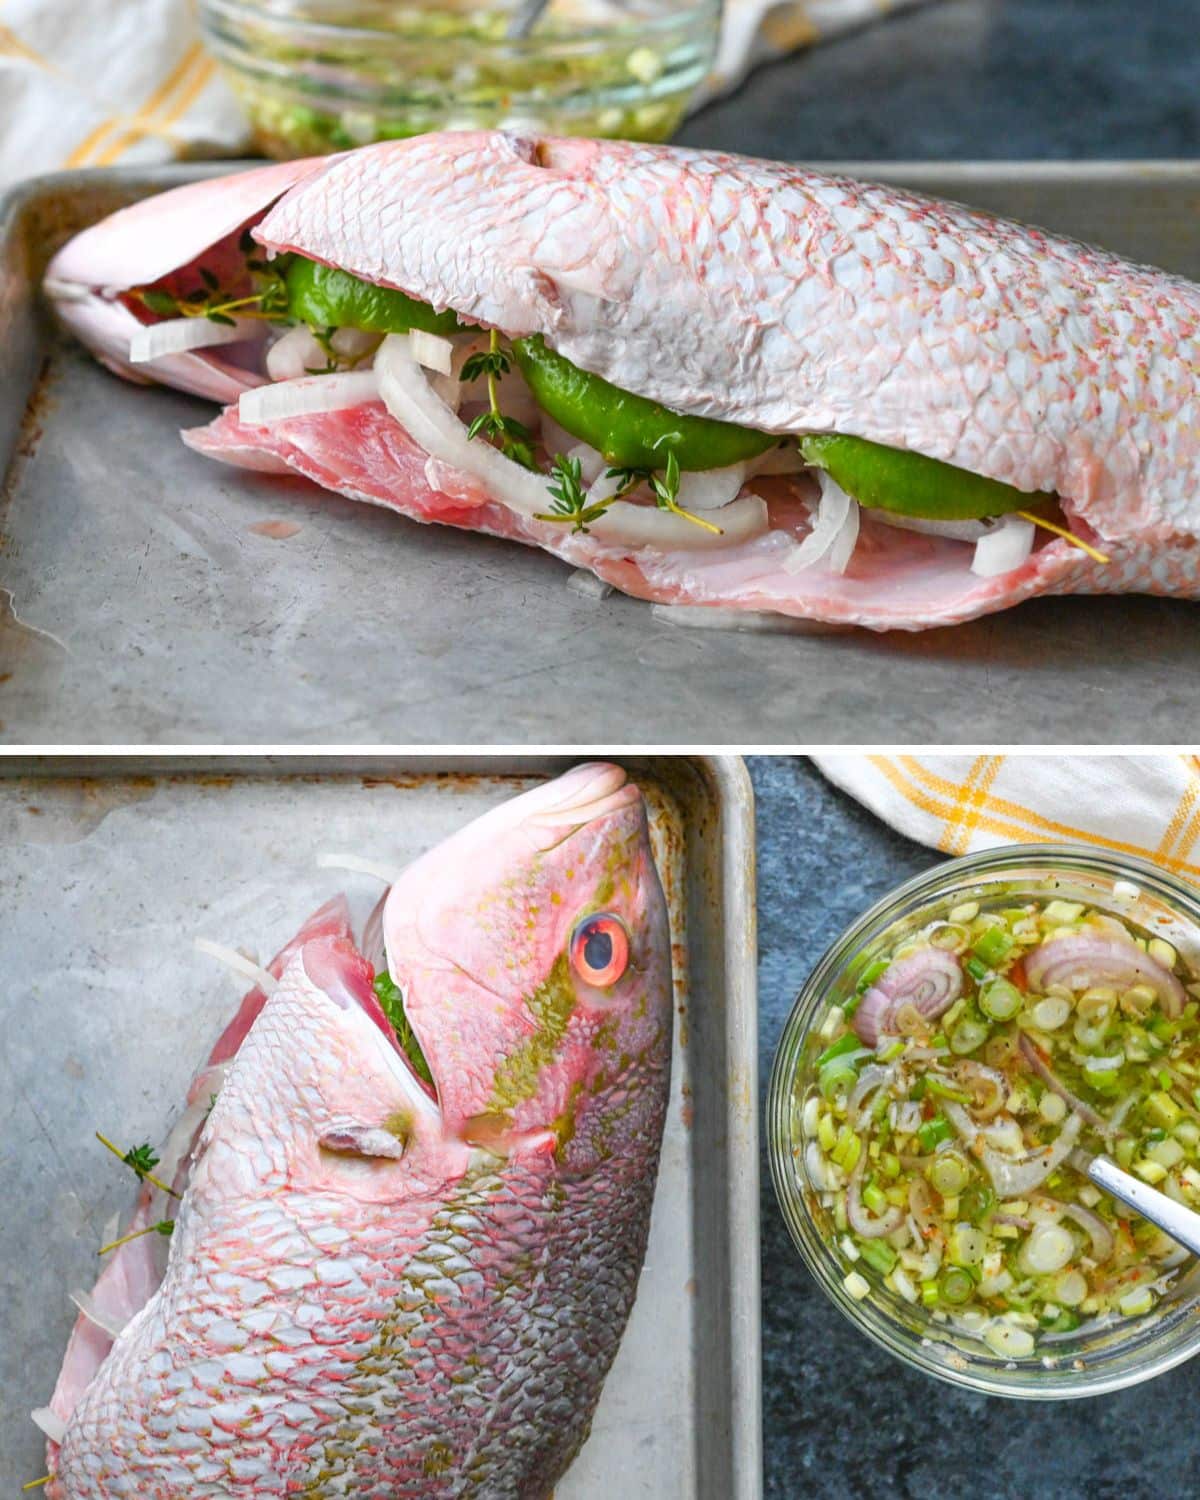 Stuffing the whole fish with aromatics.